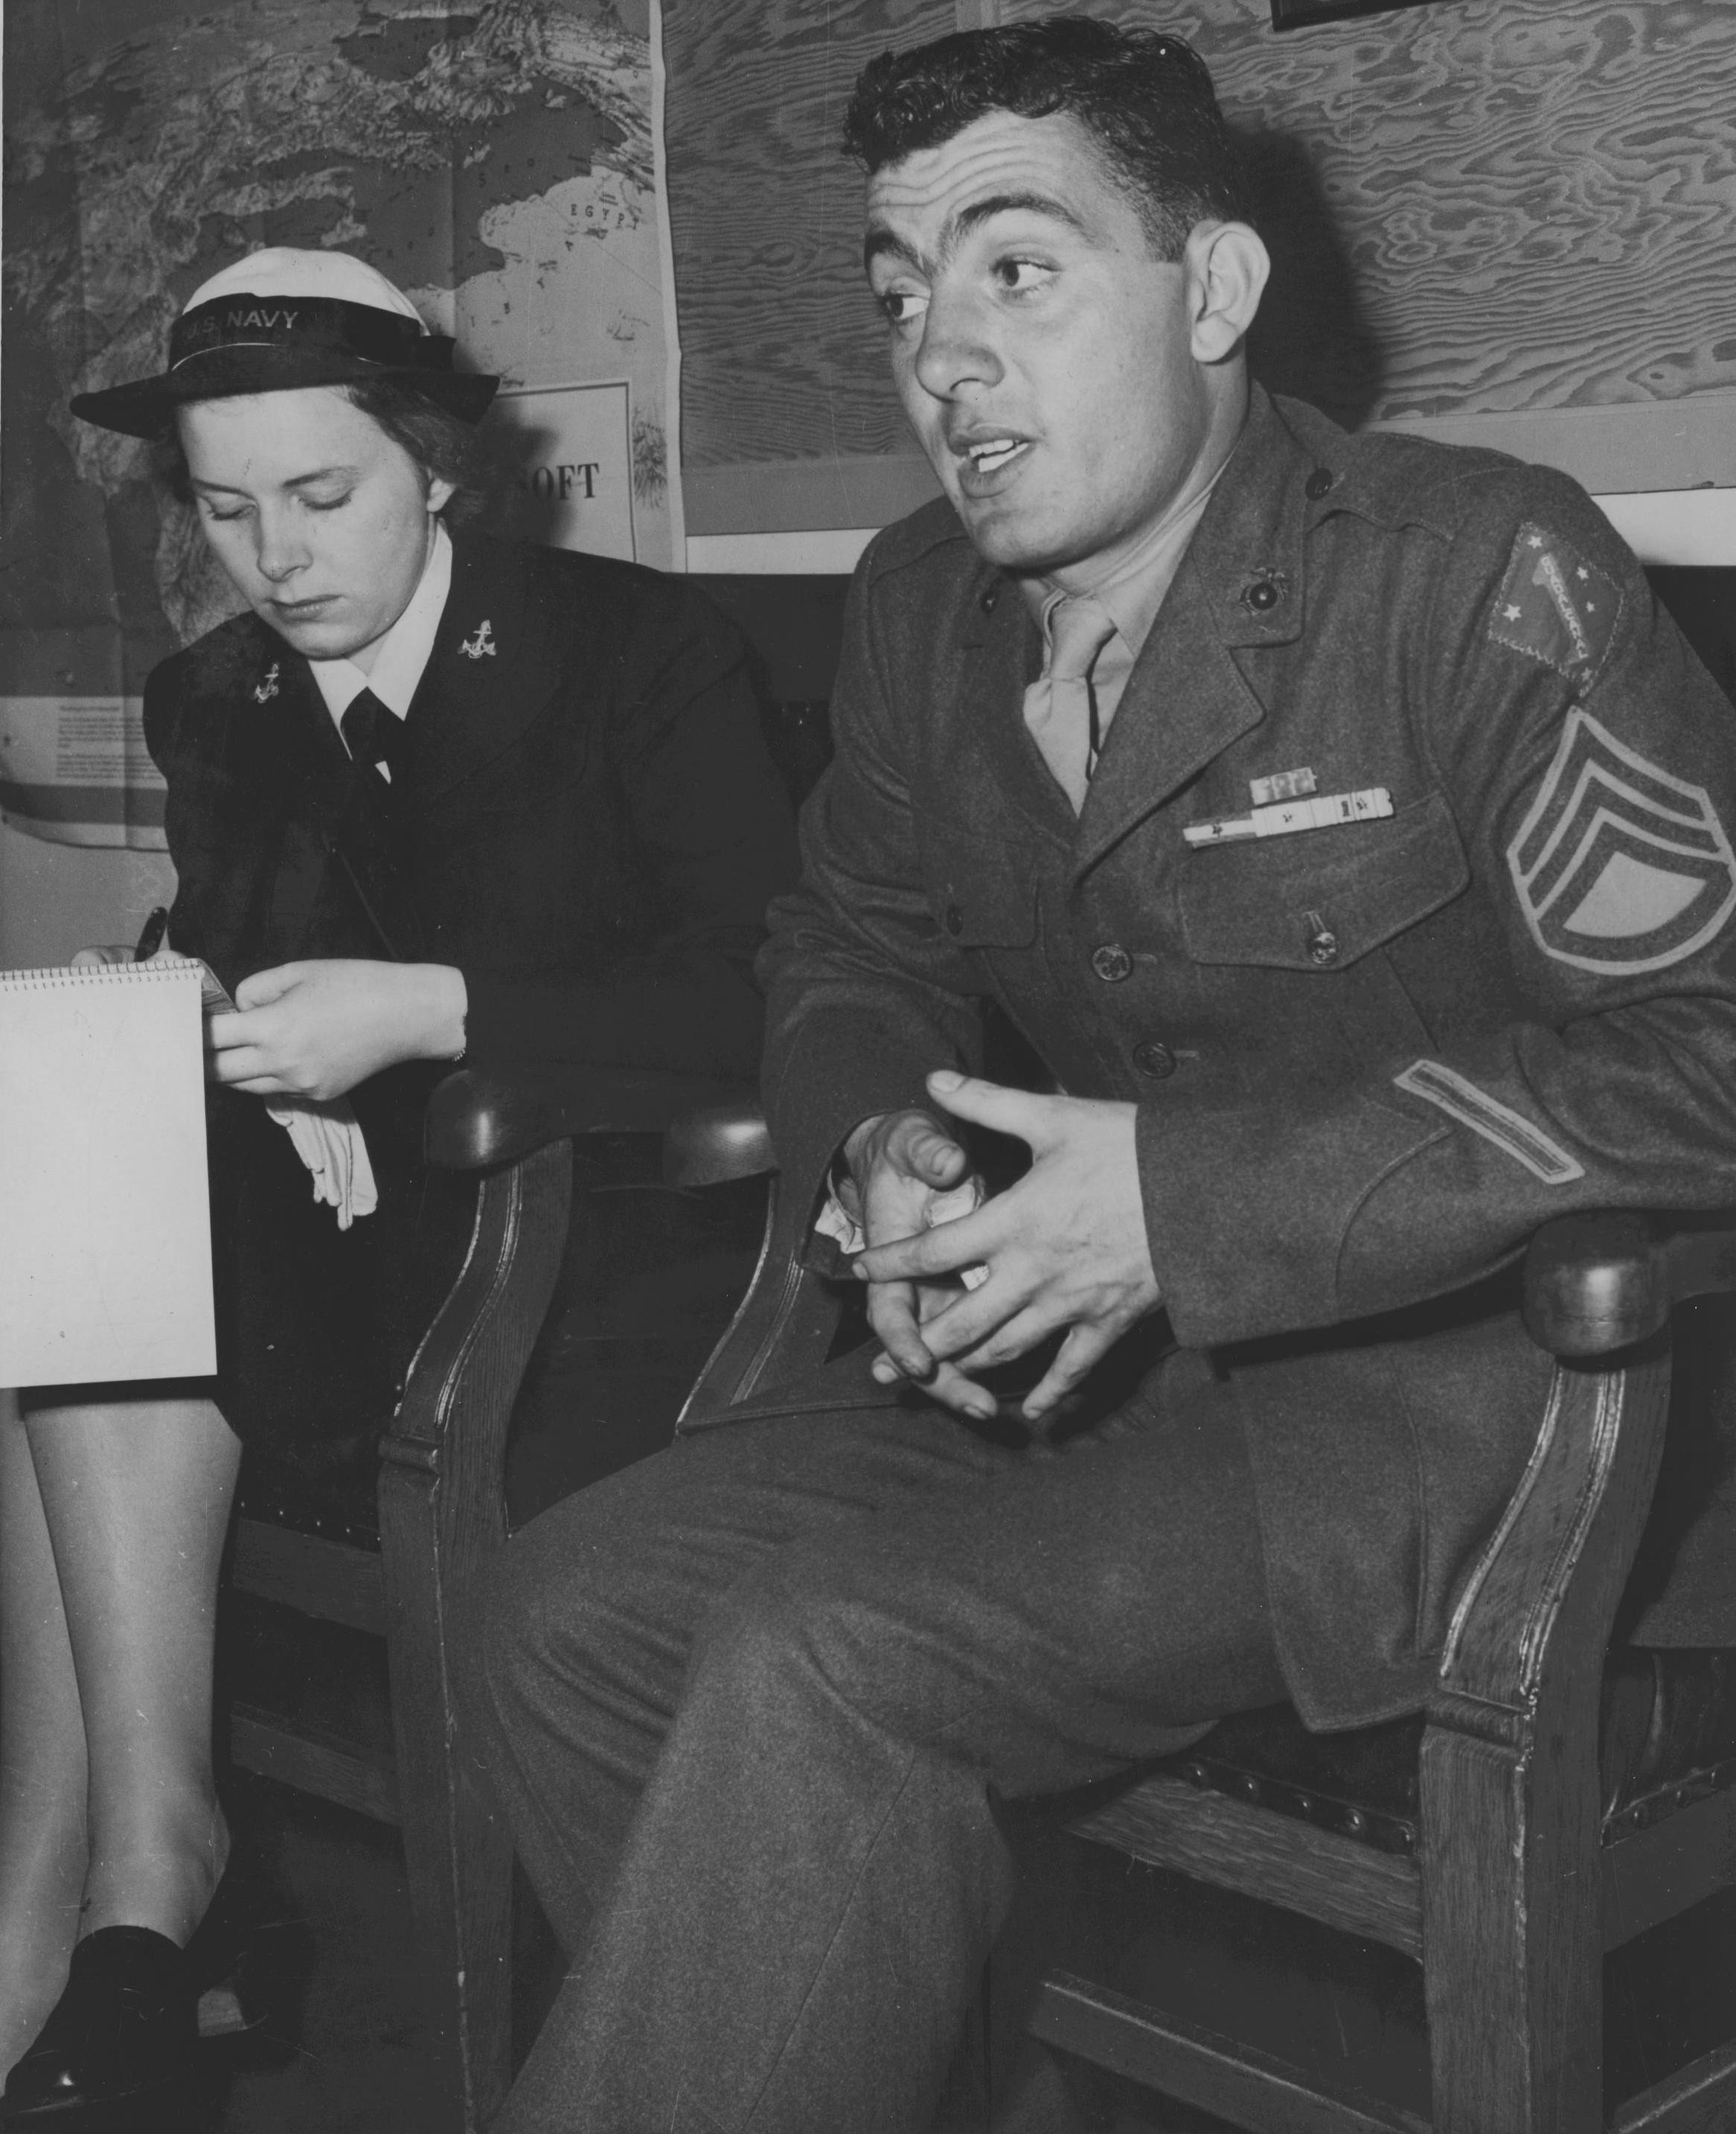 Platoon Sergeant John Basilone being interviewed by US Navy WAVE Yeoman 3rd Class Sigrid Shield, Sep 1943